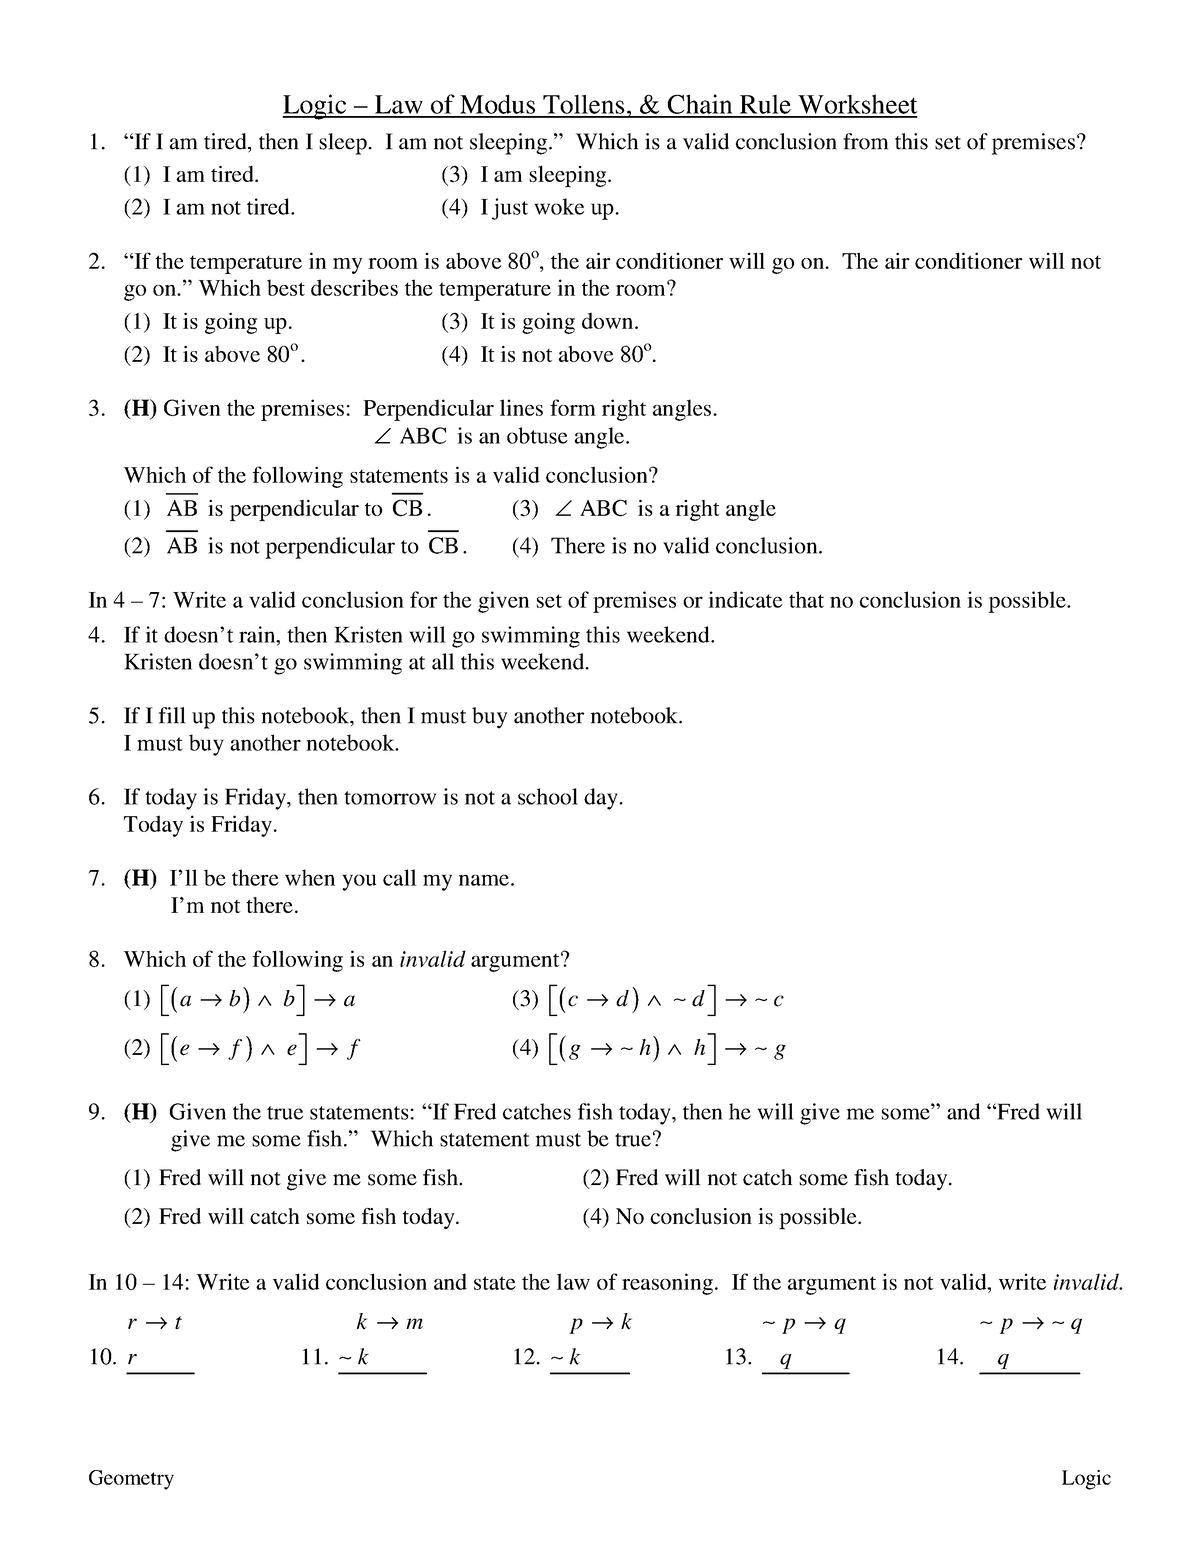 5 - law of modus tollens invalid arguments worksheet- QUIZ - MA Science ...